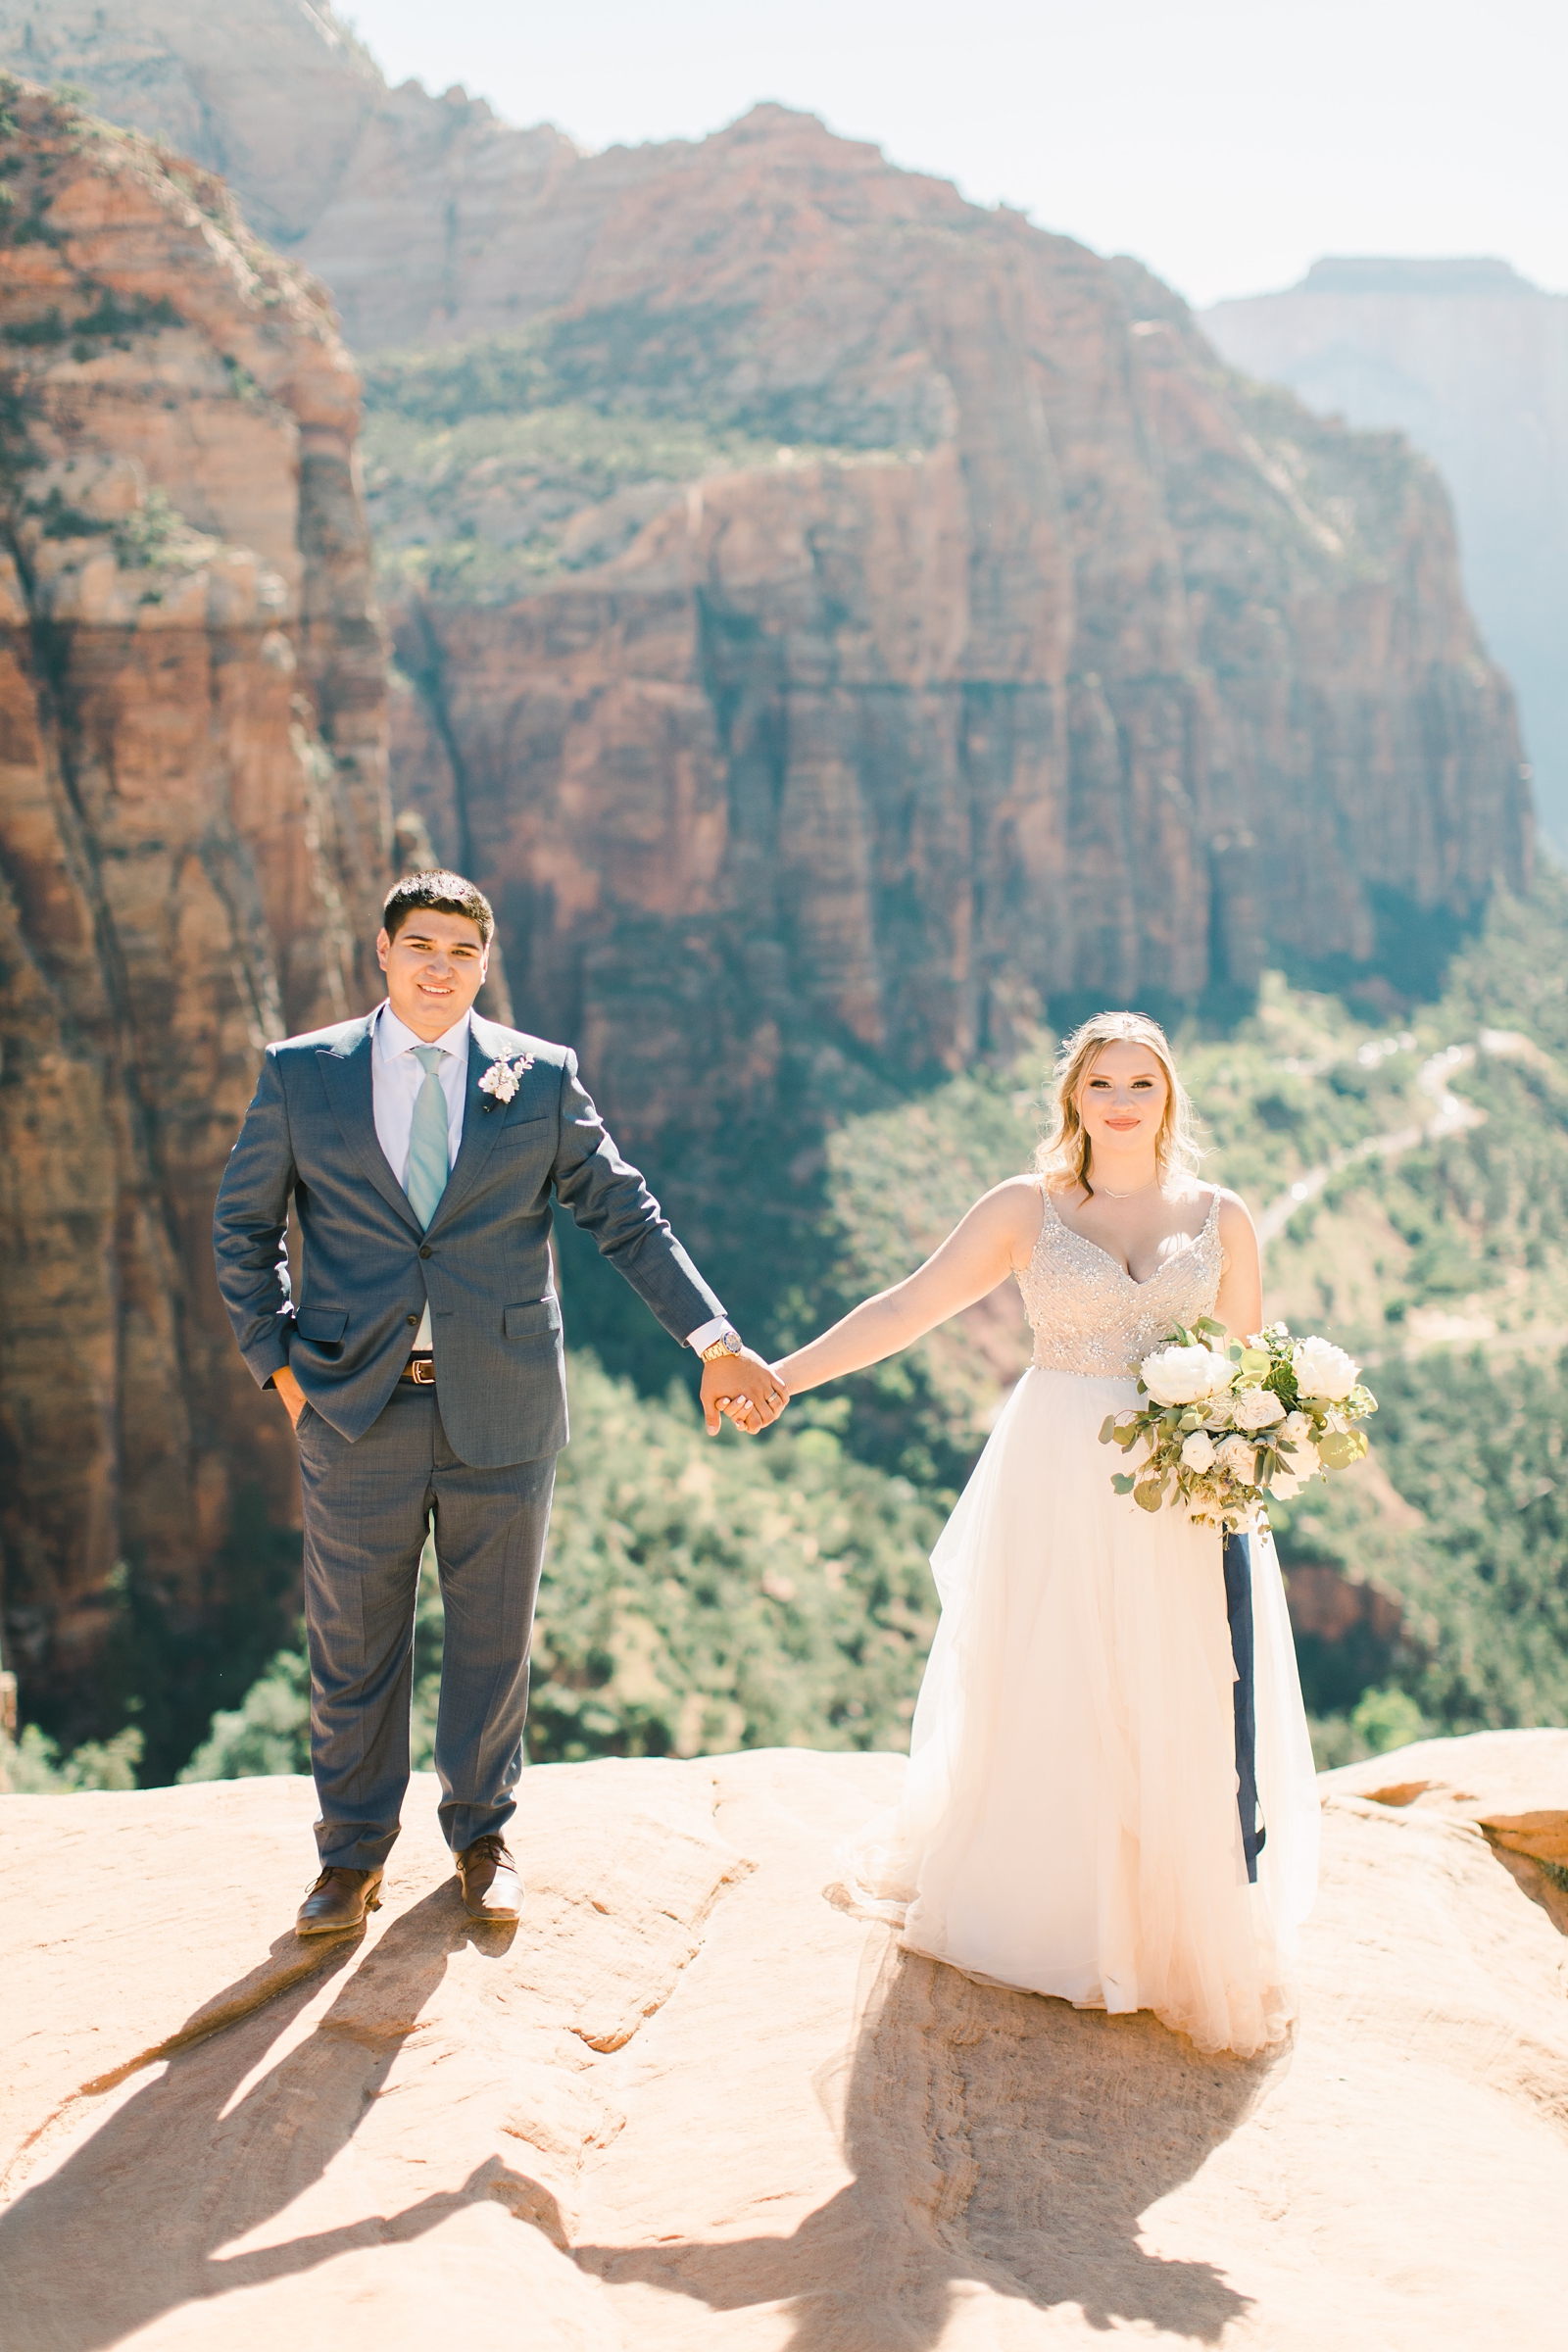 Bride and groom holding hands overlooking Zion National Park